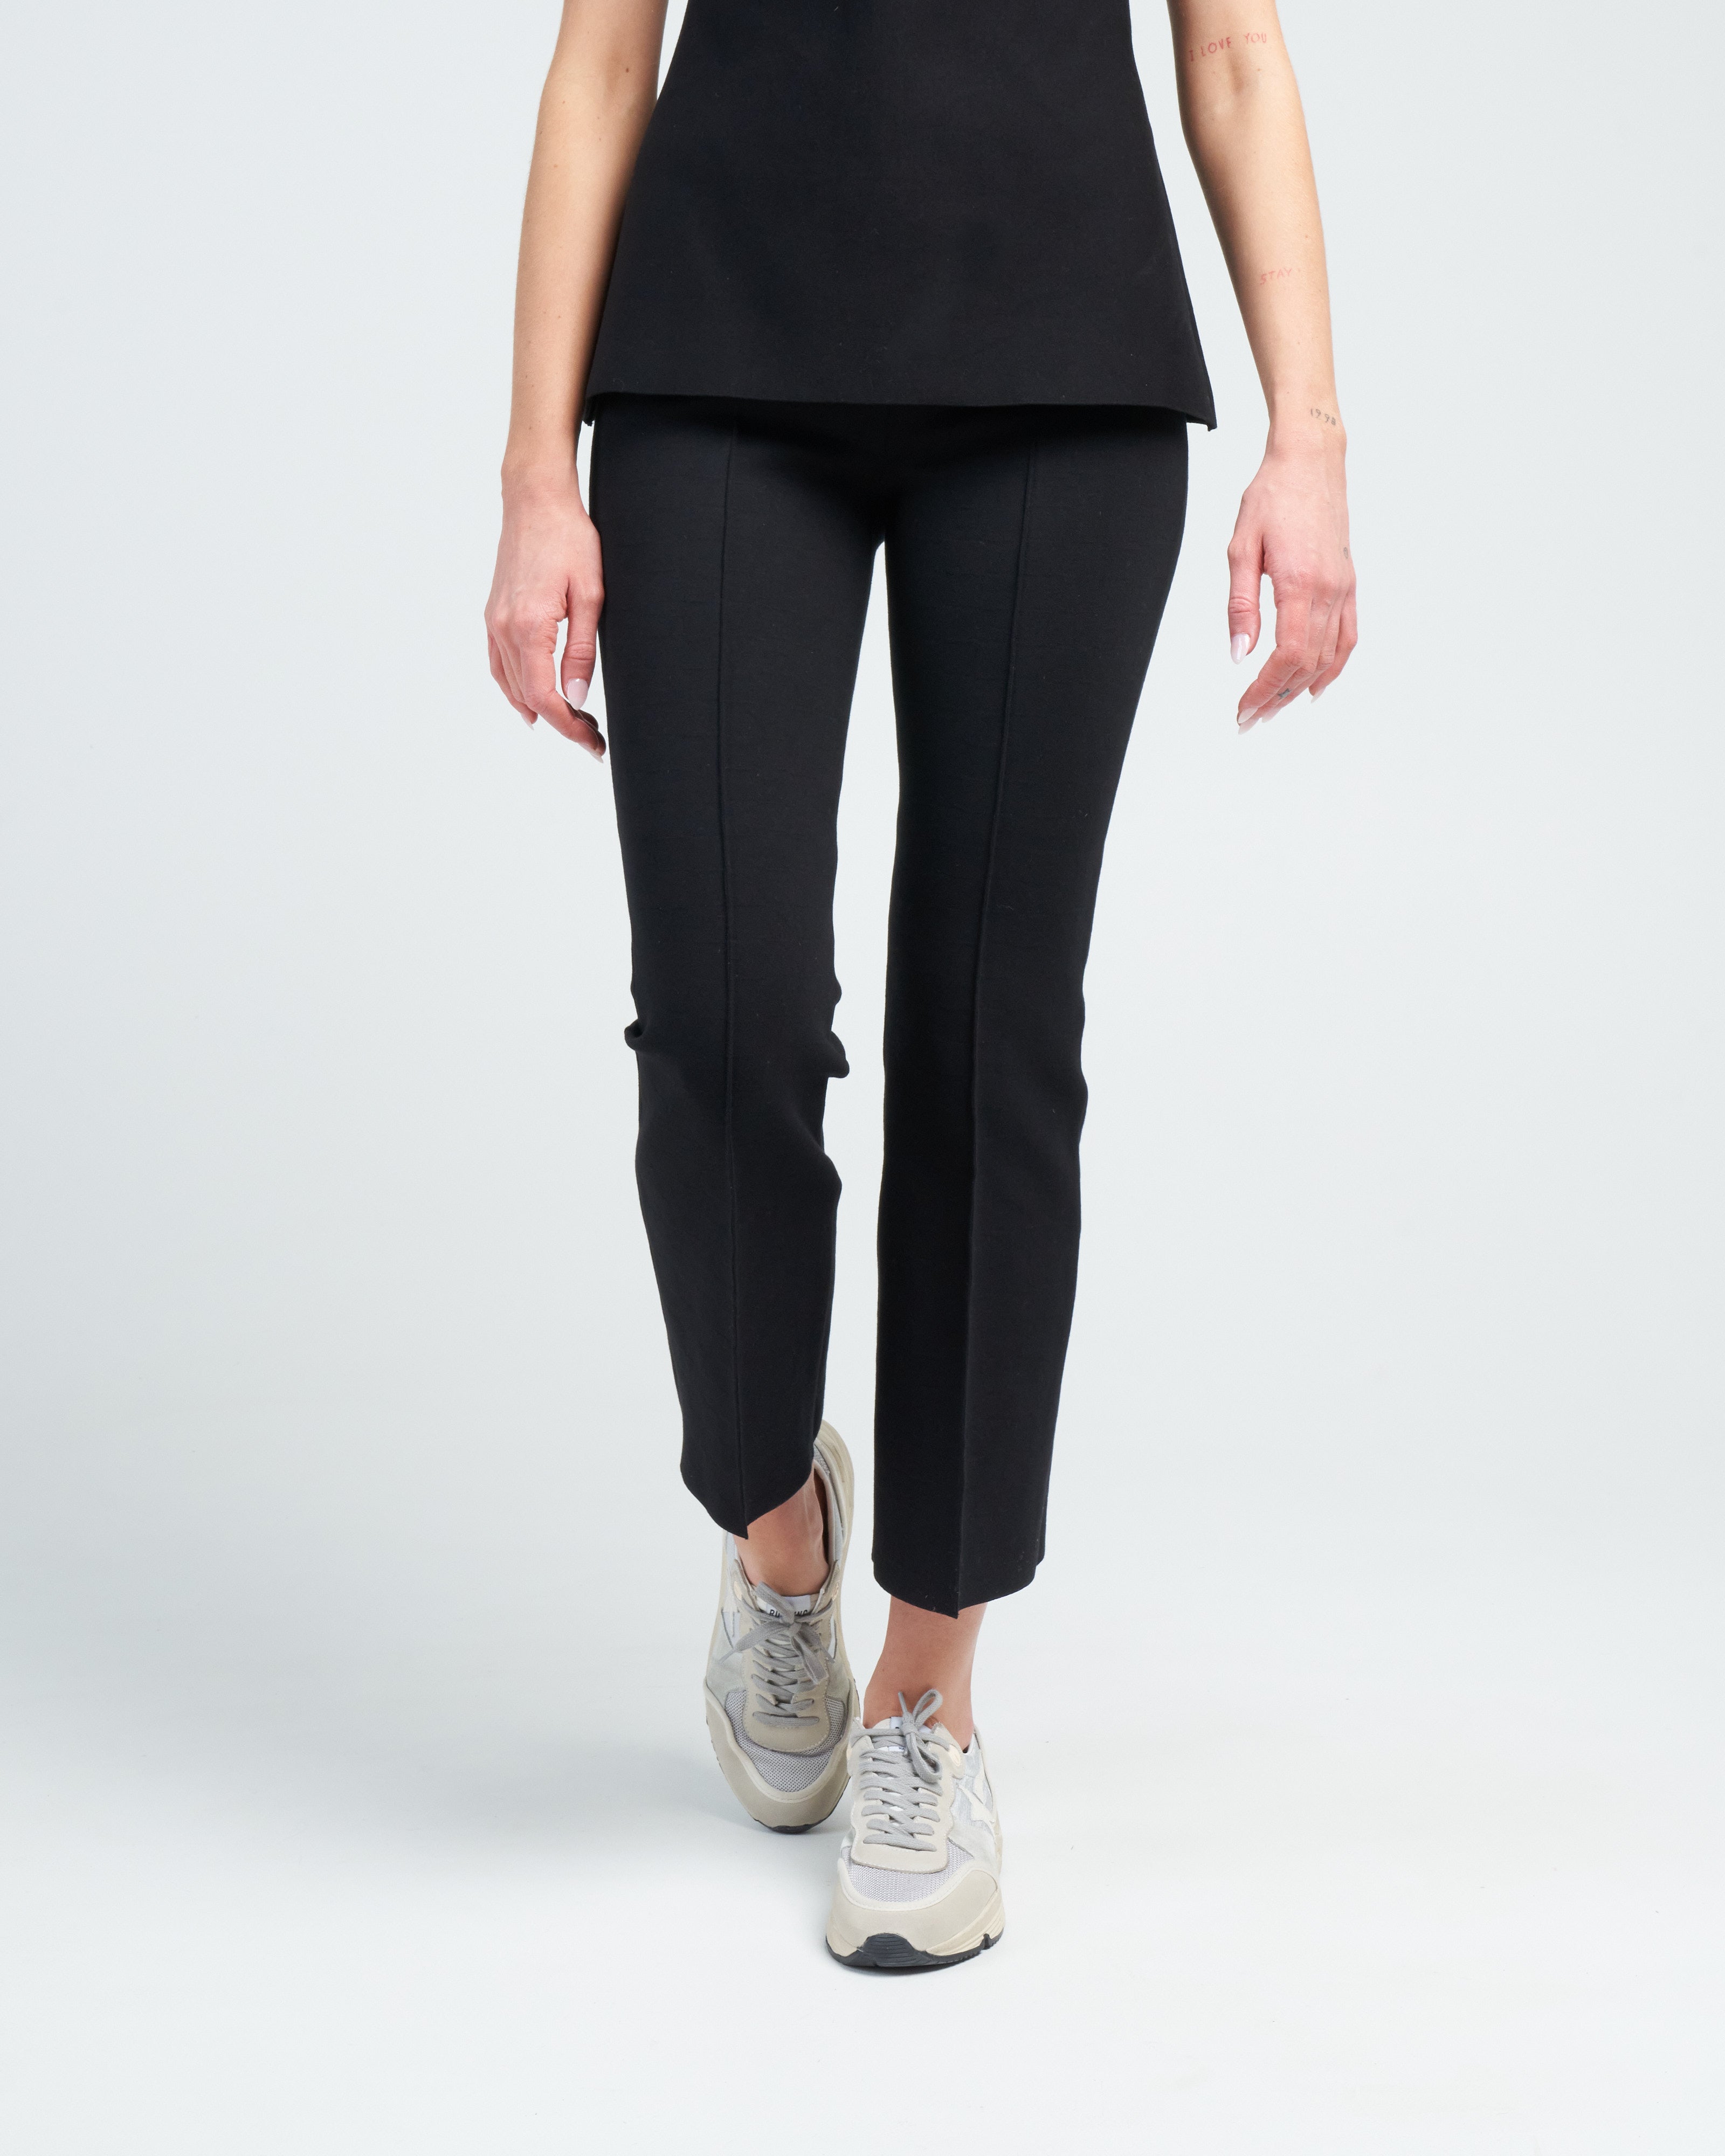 SIZE GUIDE THE LEGGING – BLACKPANTS